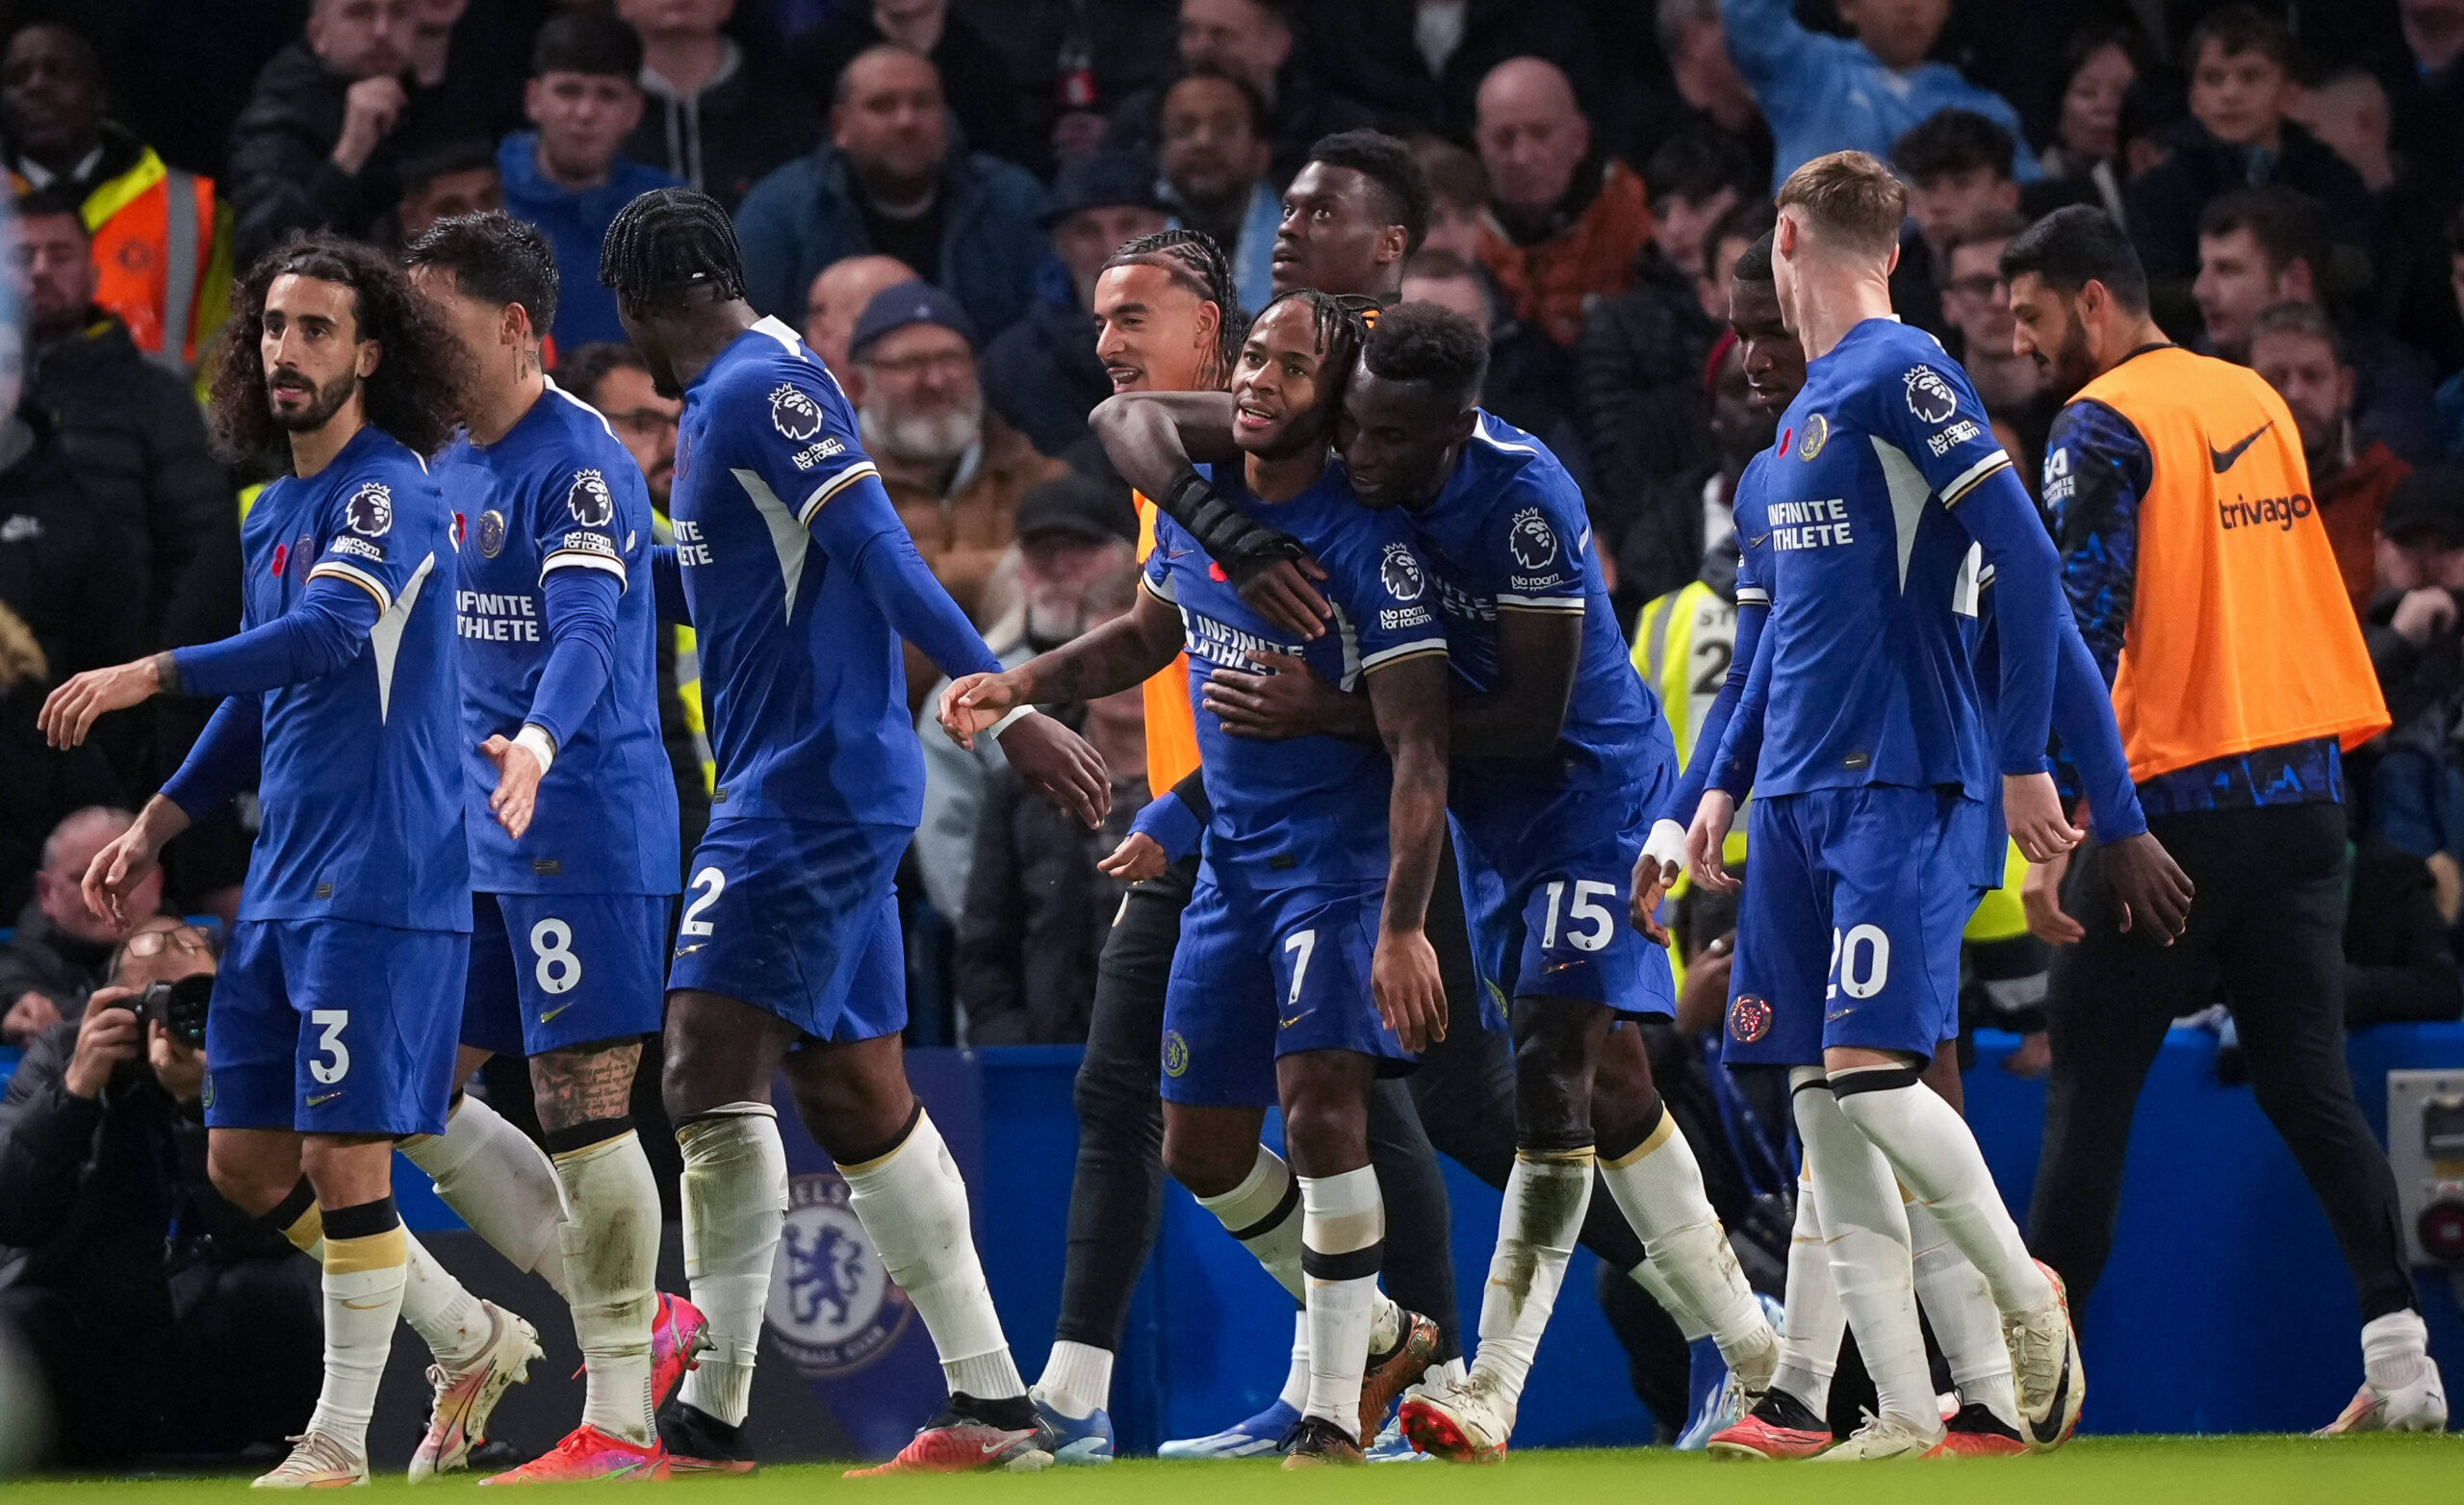 Chelsea players celebrate together following goal